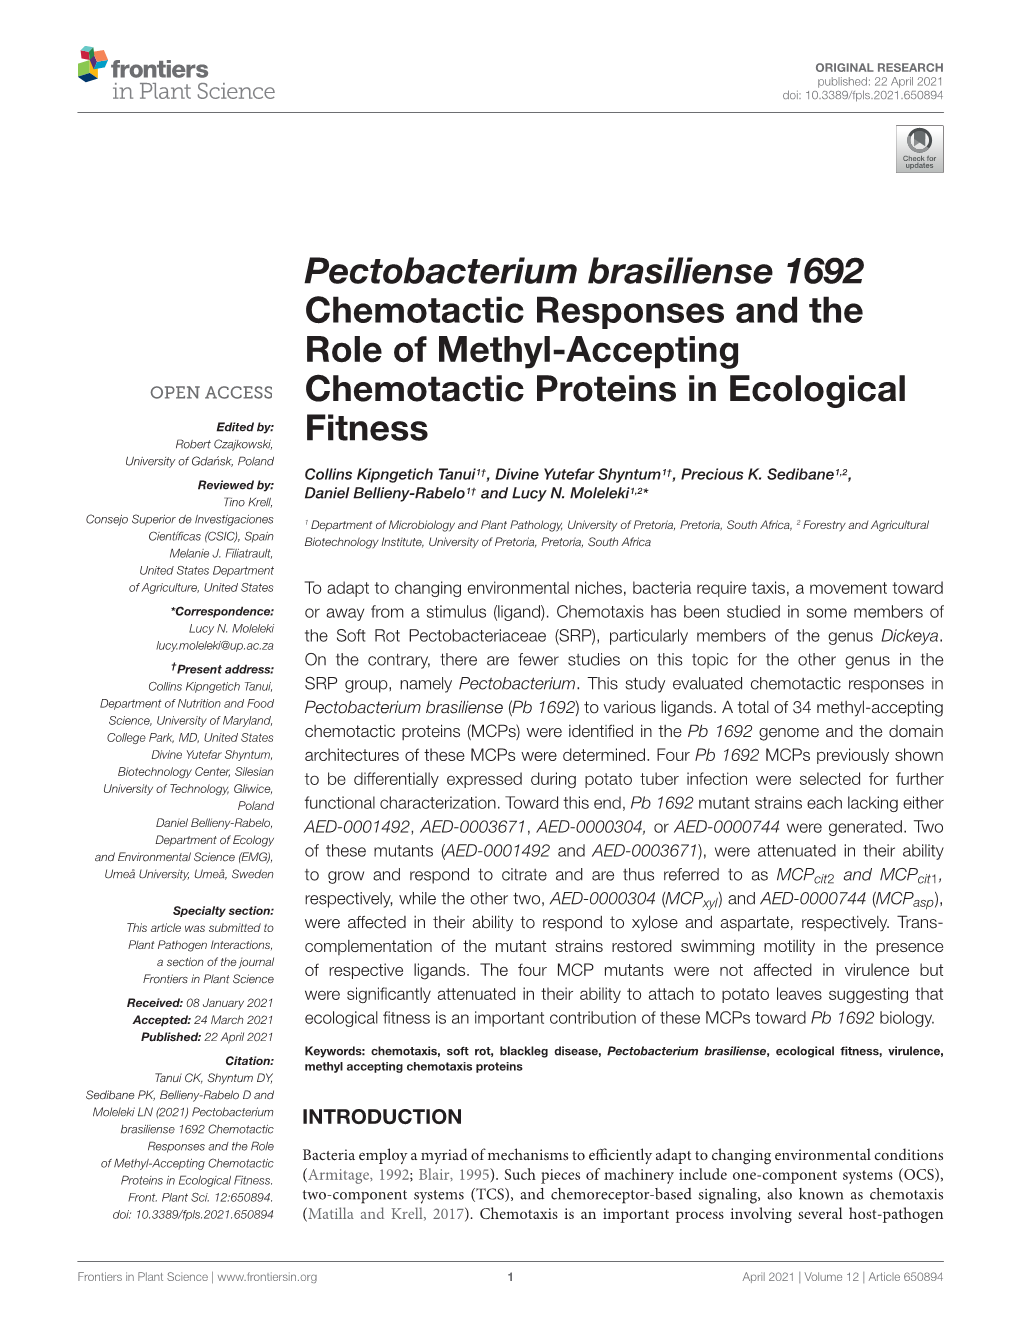 Pectobacterium Brasiliense 1692 Chemotactic Responses and the Role of Methyl-Accepting Chemotactic Proteins in Ecological Fitnes